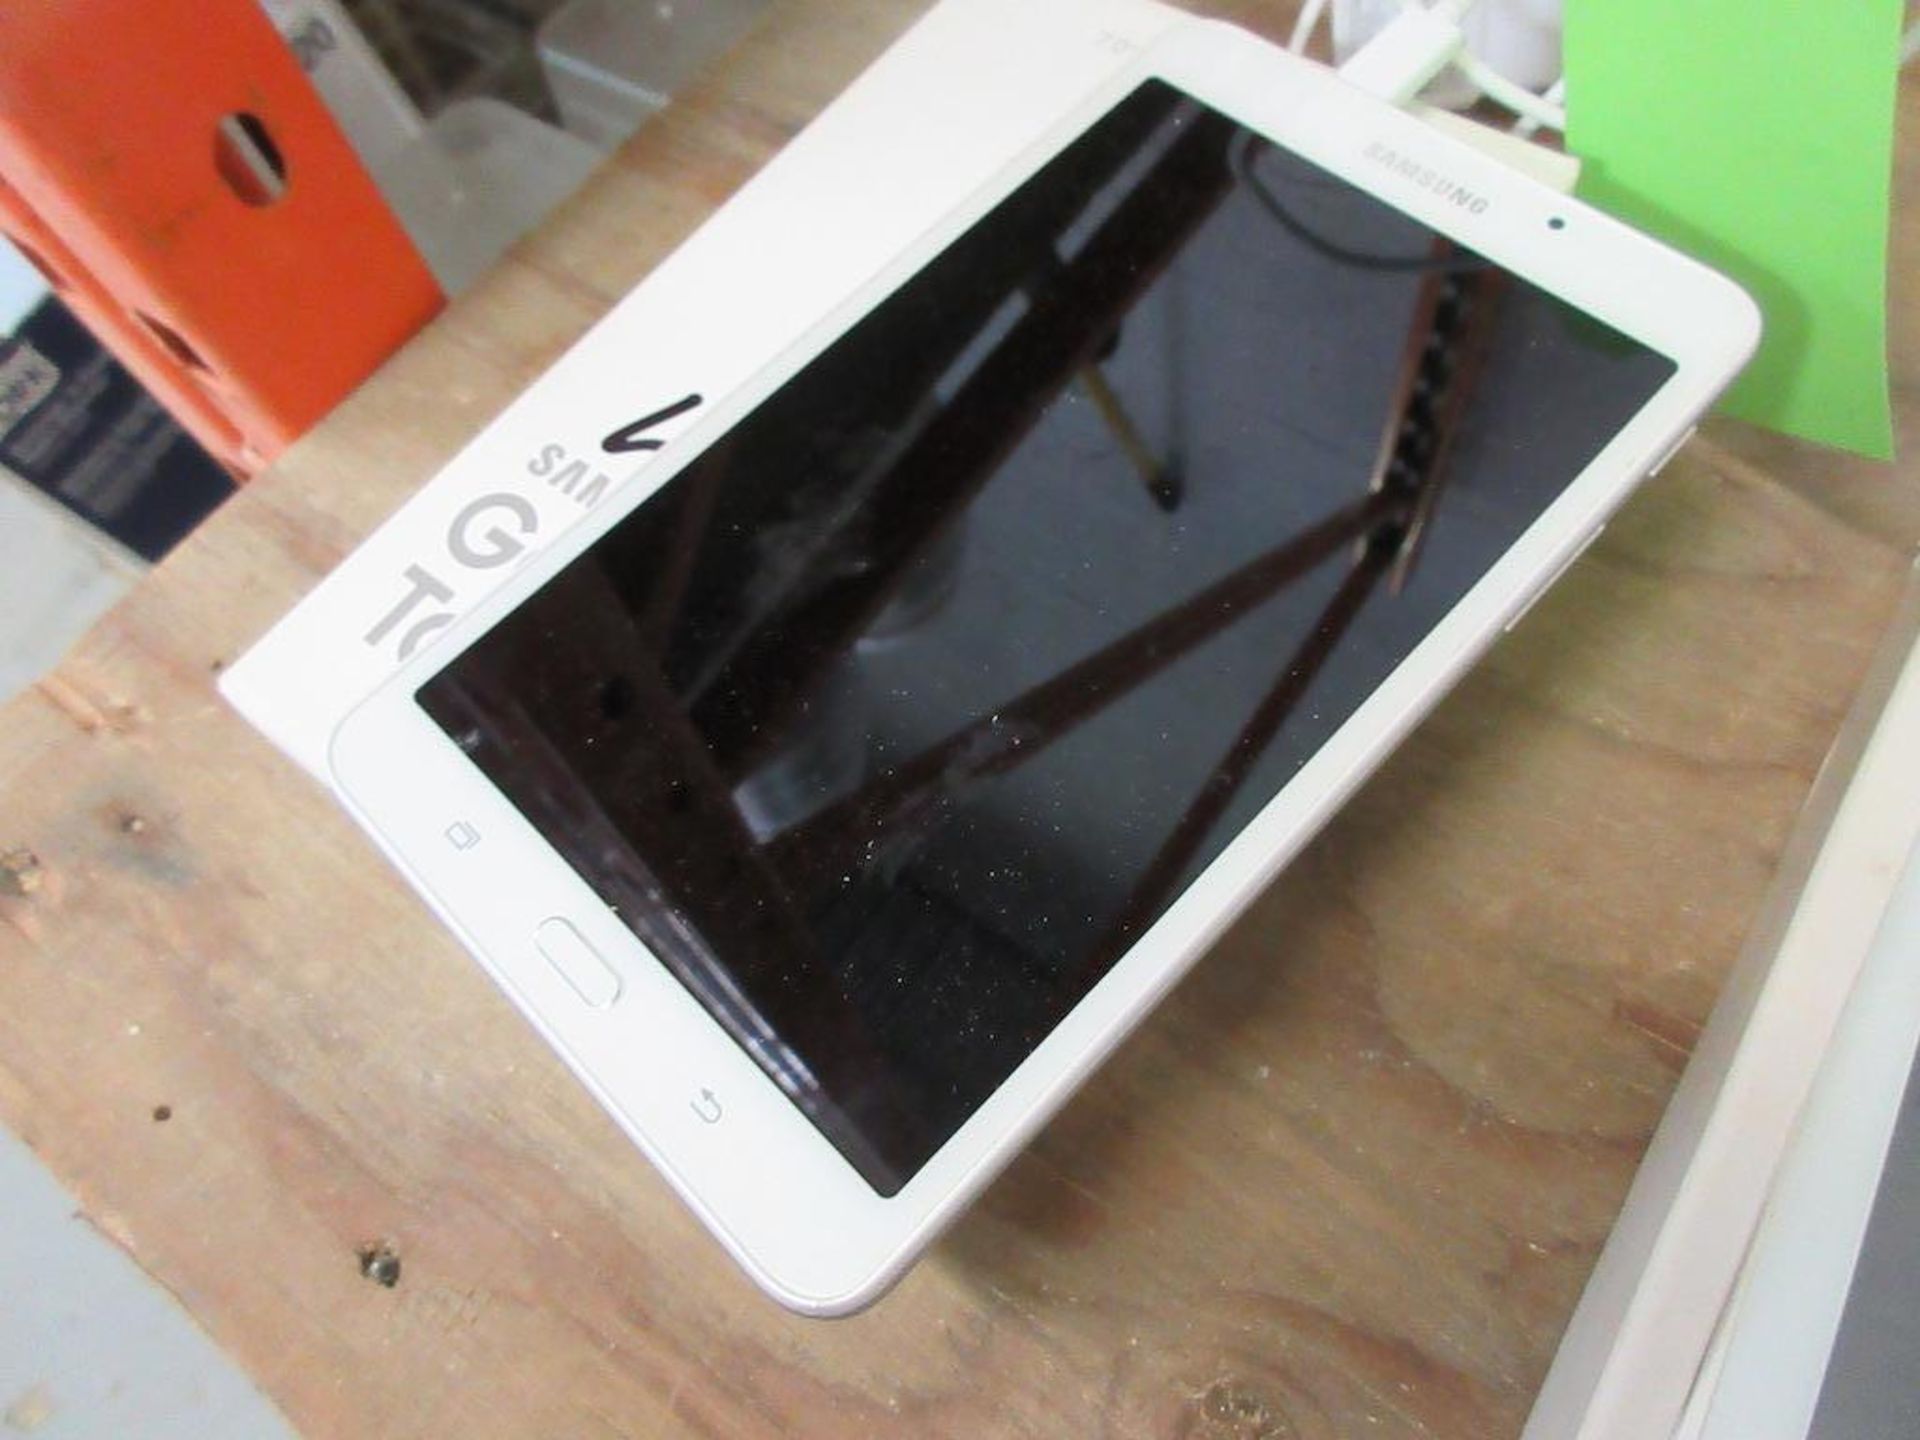 Lot 2 tablets: Samsung Galaxy Tab A, Acer w cracked screen - Image 3 of 5